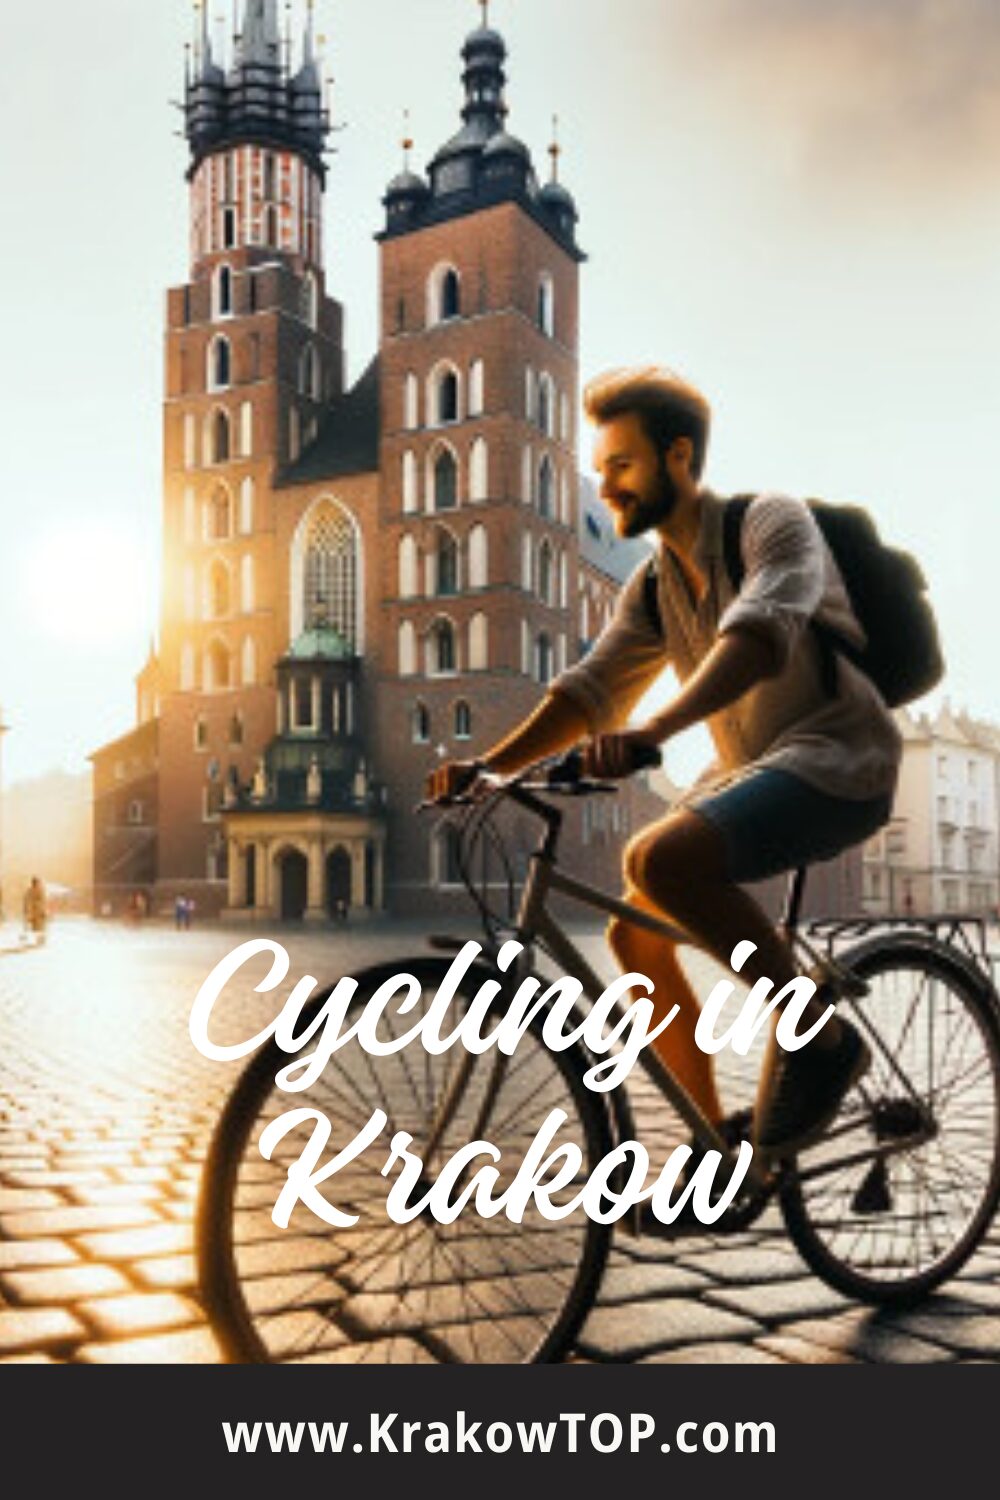 Guide for Cycling in Krakow